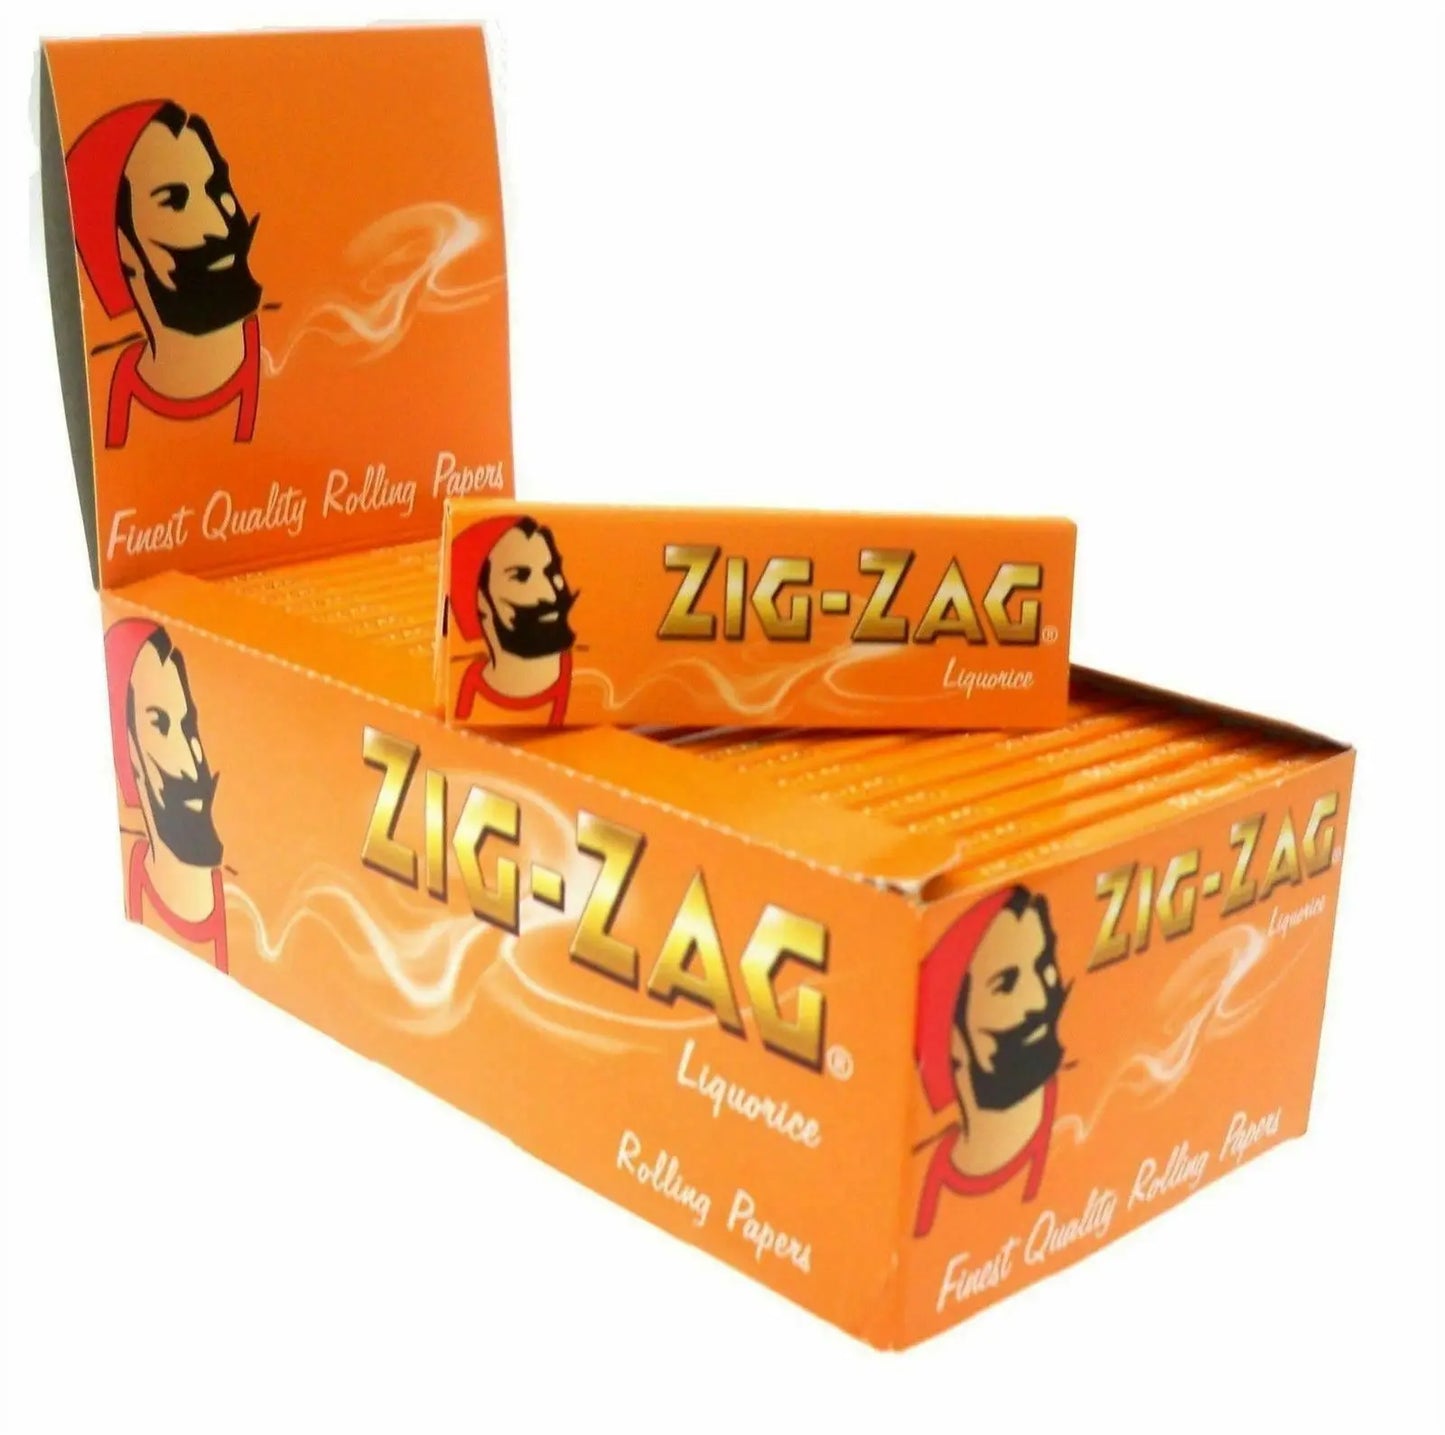 Zig-Zag Rolling Papers - Liquorice - - Rolling Papers - Zig-Zag - Cali Tobacconist